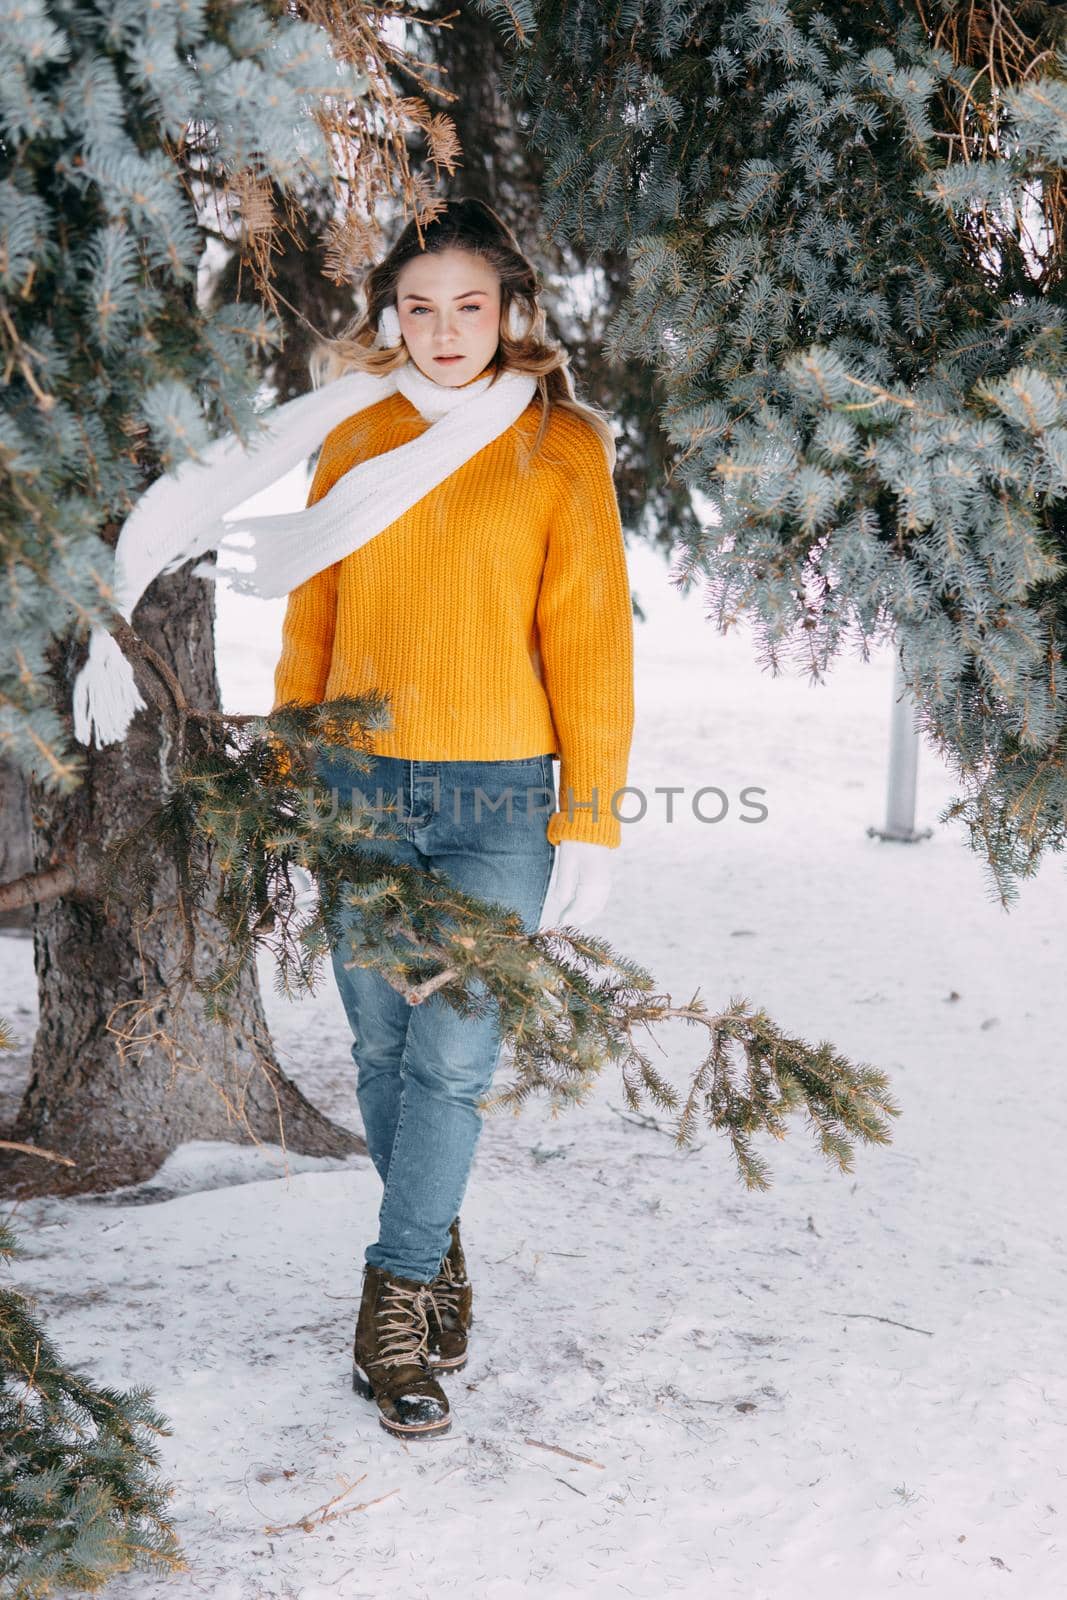 Teen blonde in a yellow sweater outside in winter. A teenage girl on a walk in winter clothes in a snowy forest by Annu1tochka